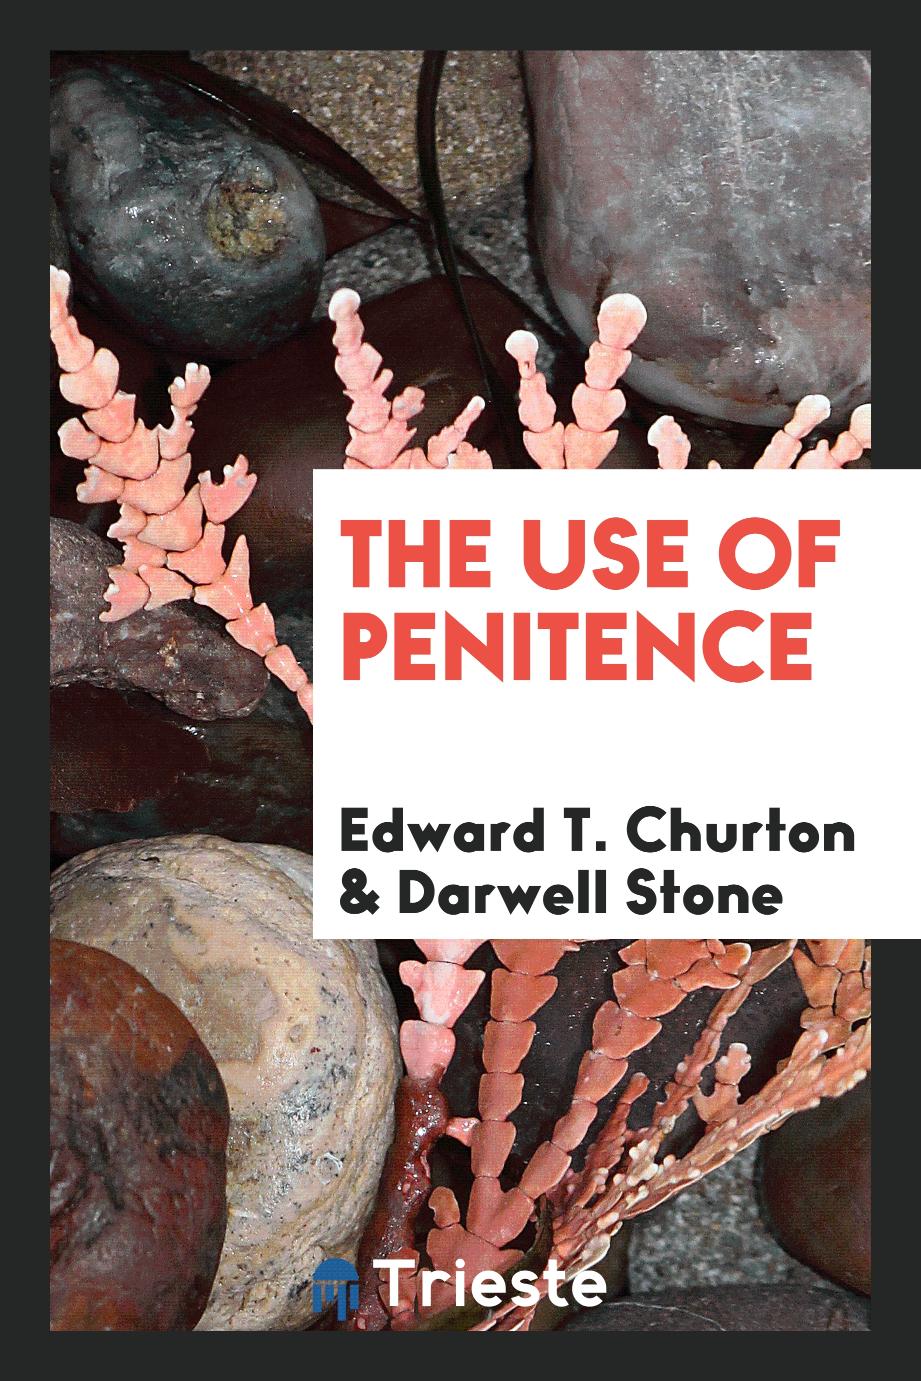 The use of penitence